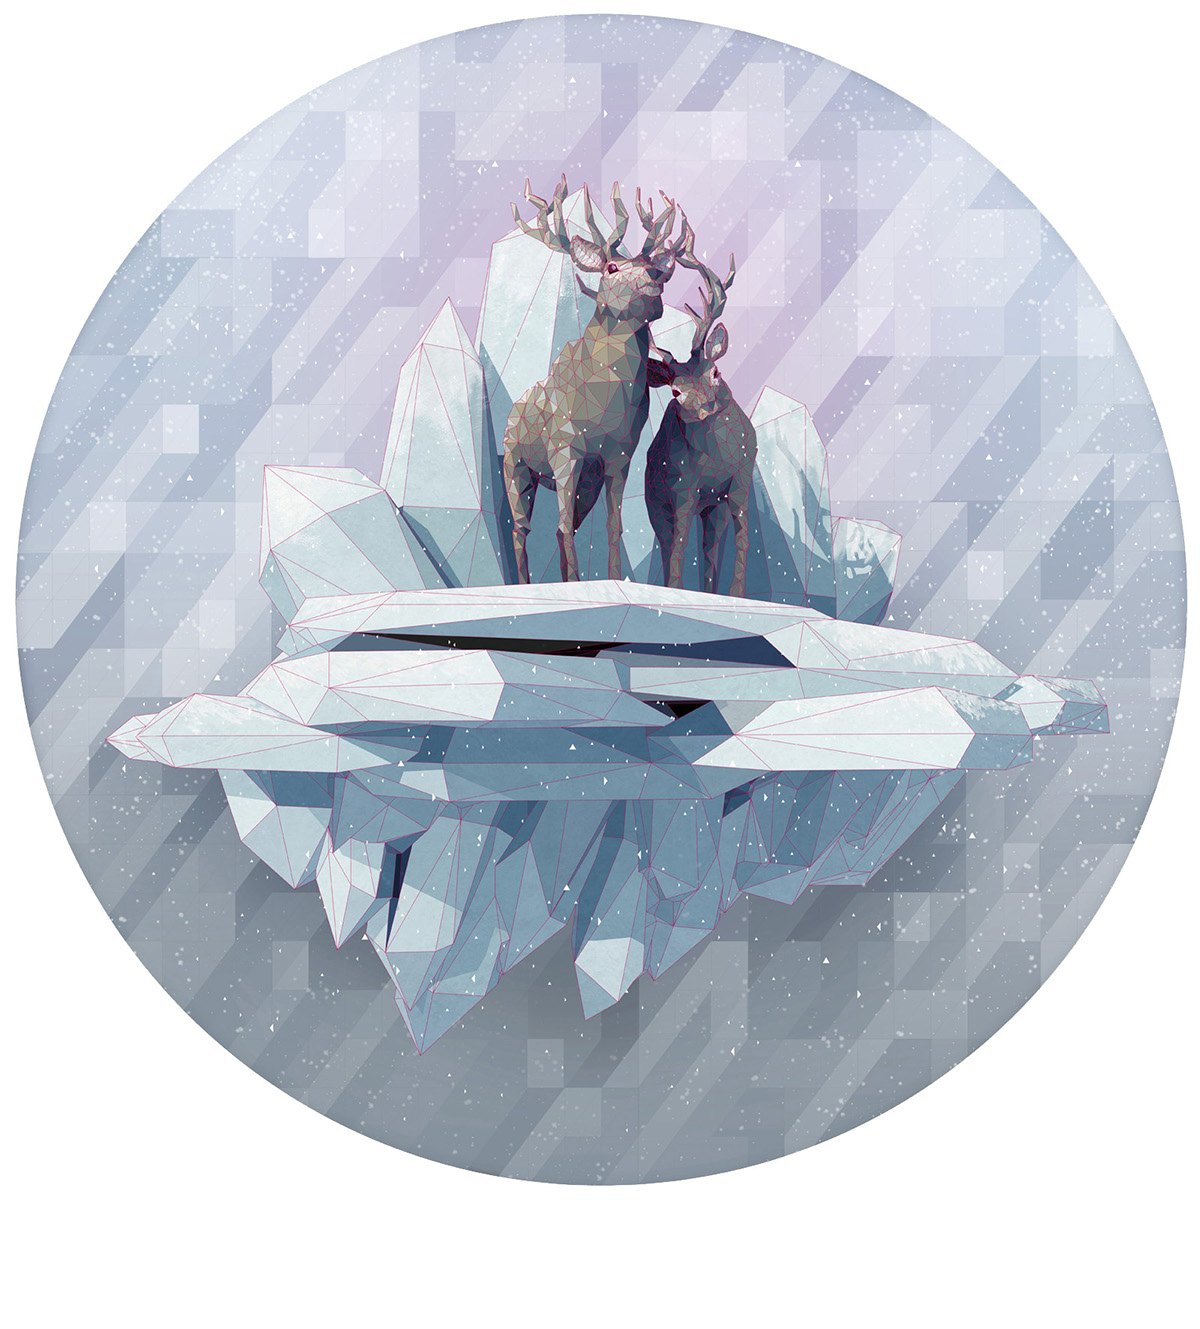 Low Poly animals winter